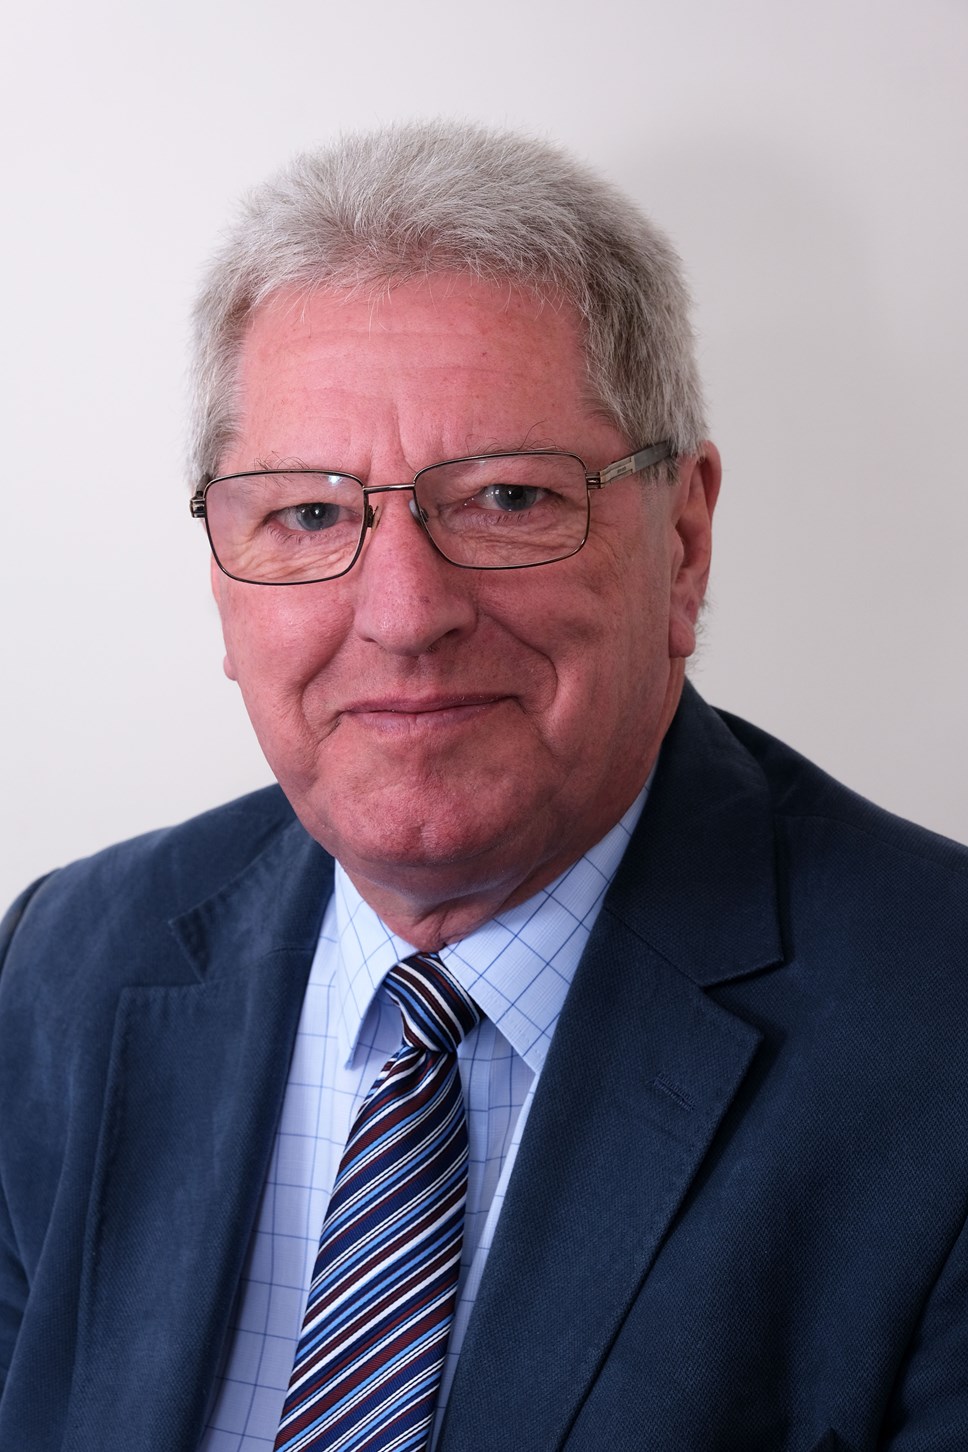 Cllr David Simpson, former Leader of Pembrokeshire County Council